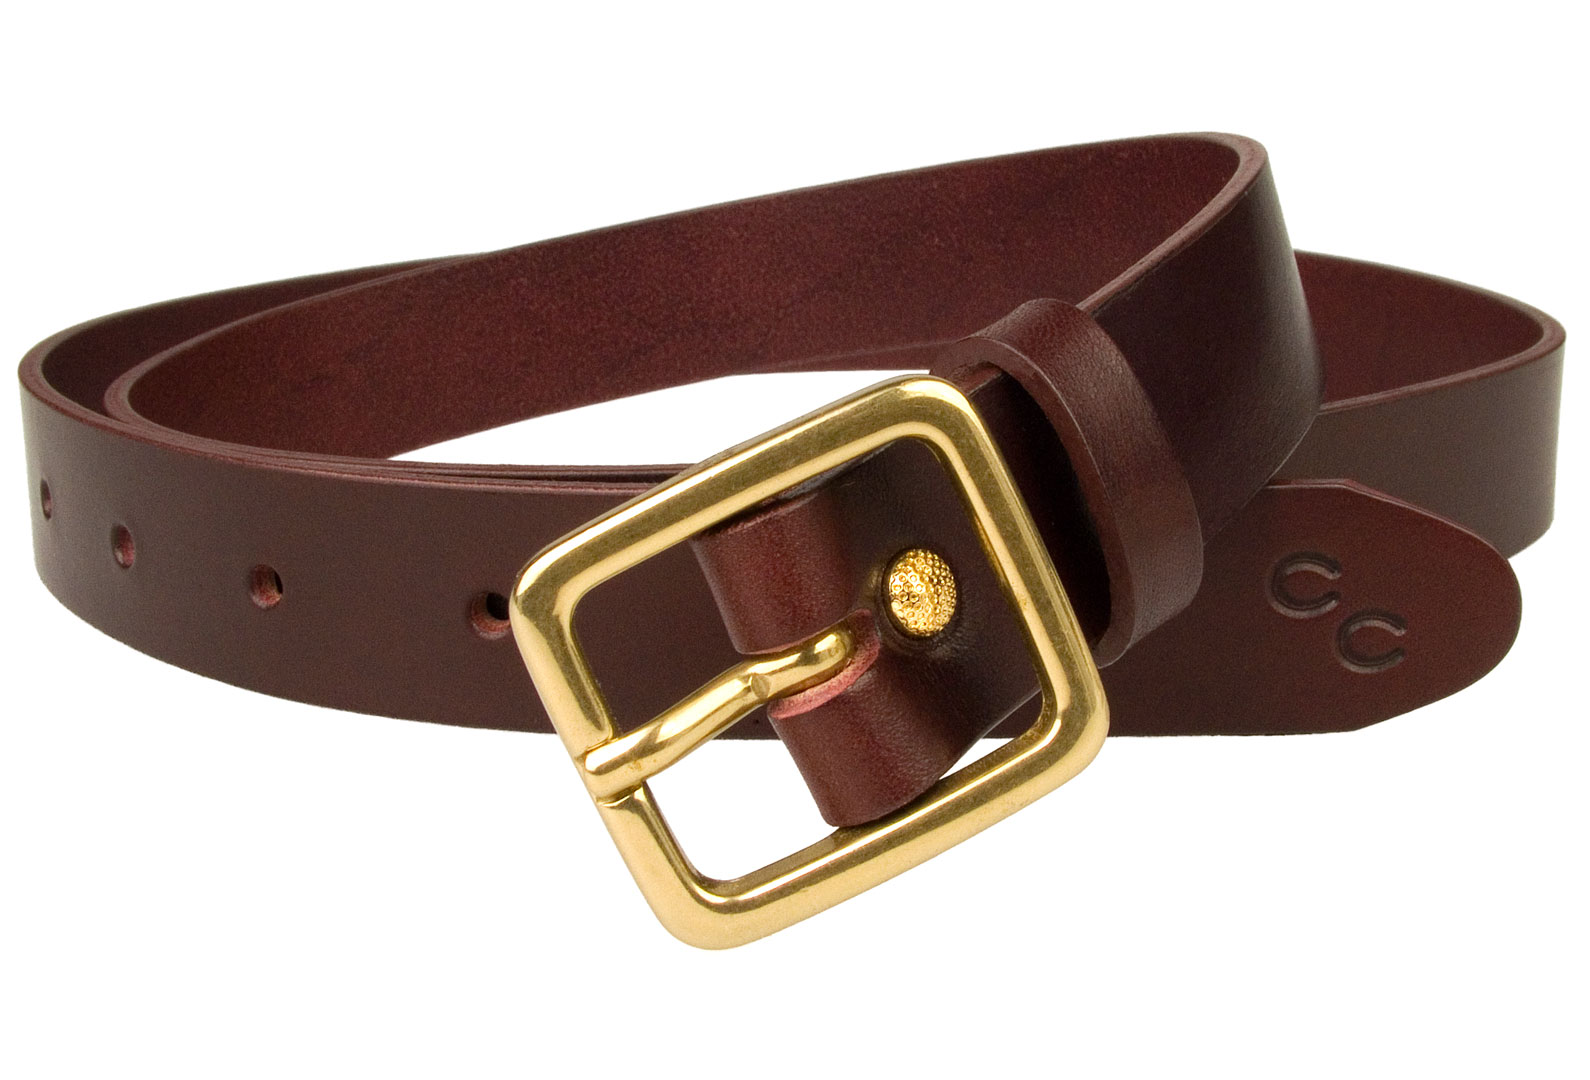 leather buckle